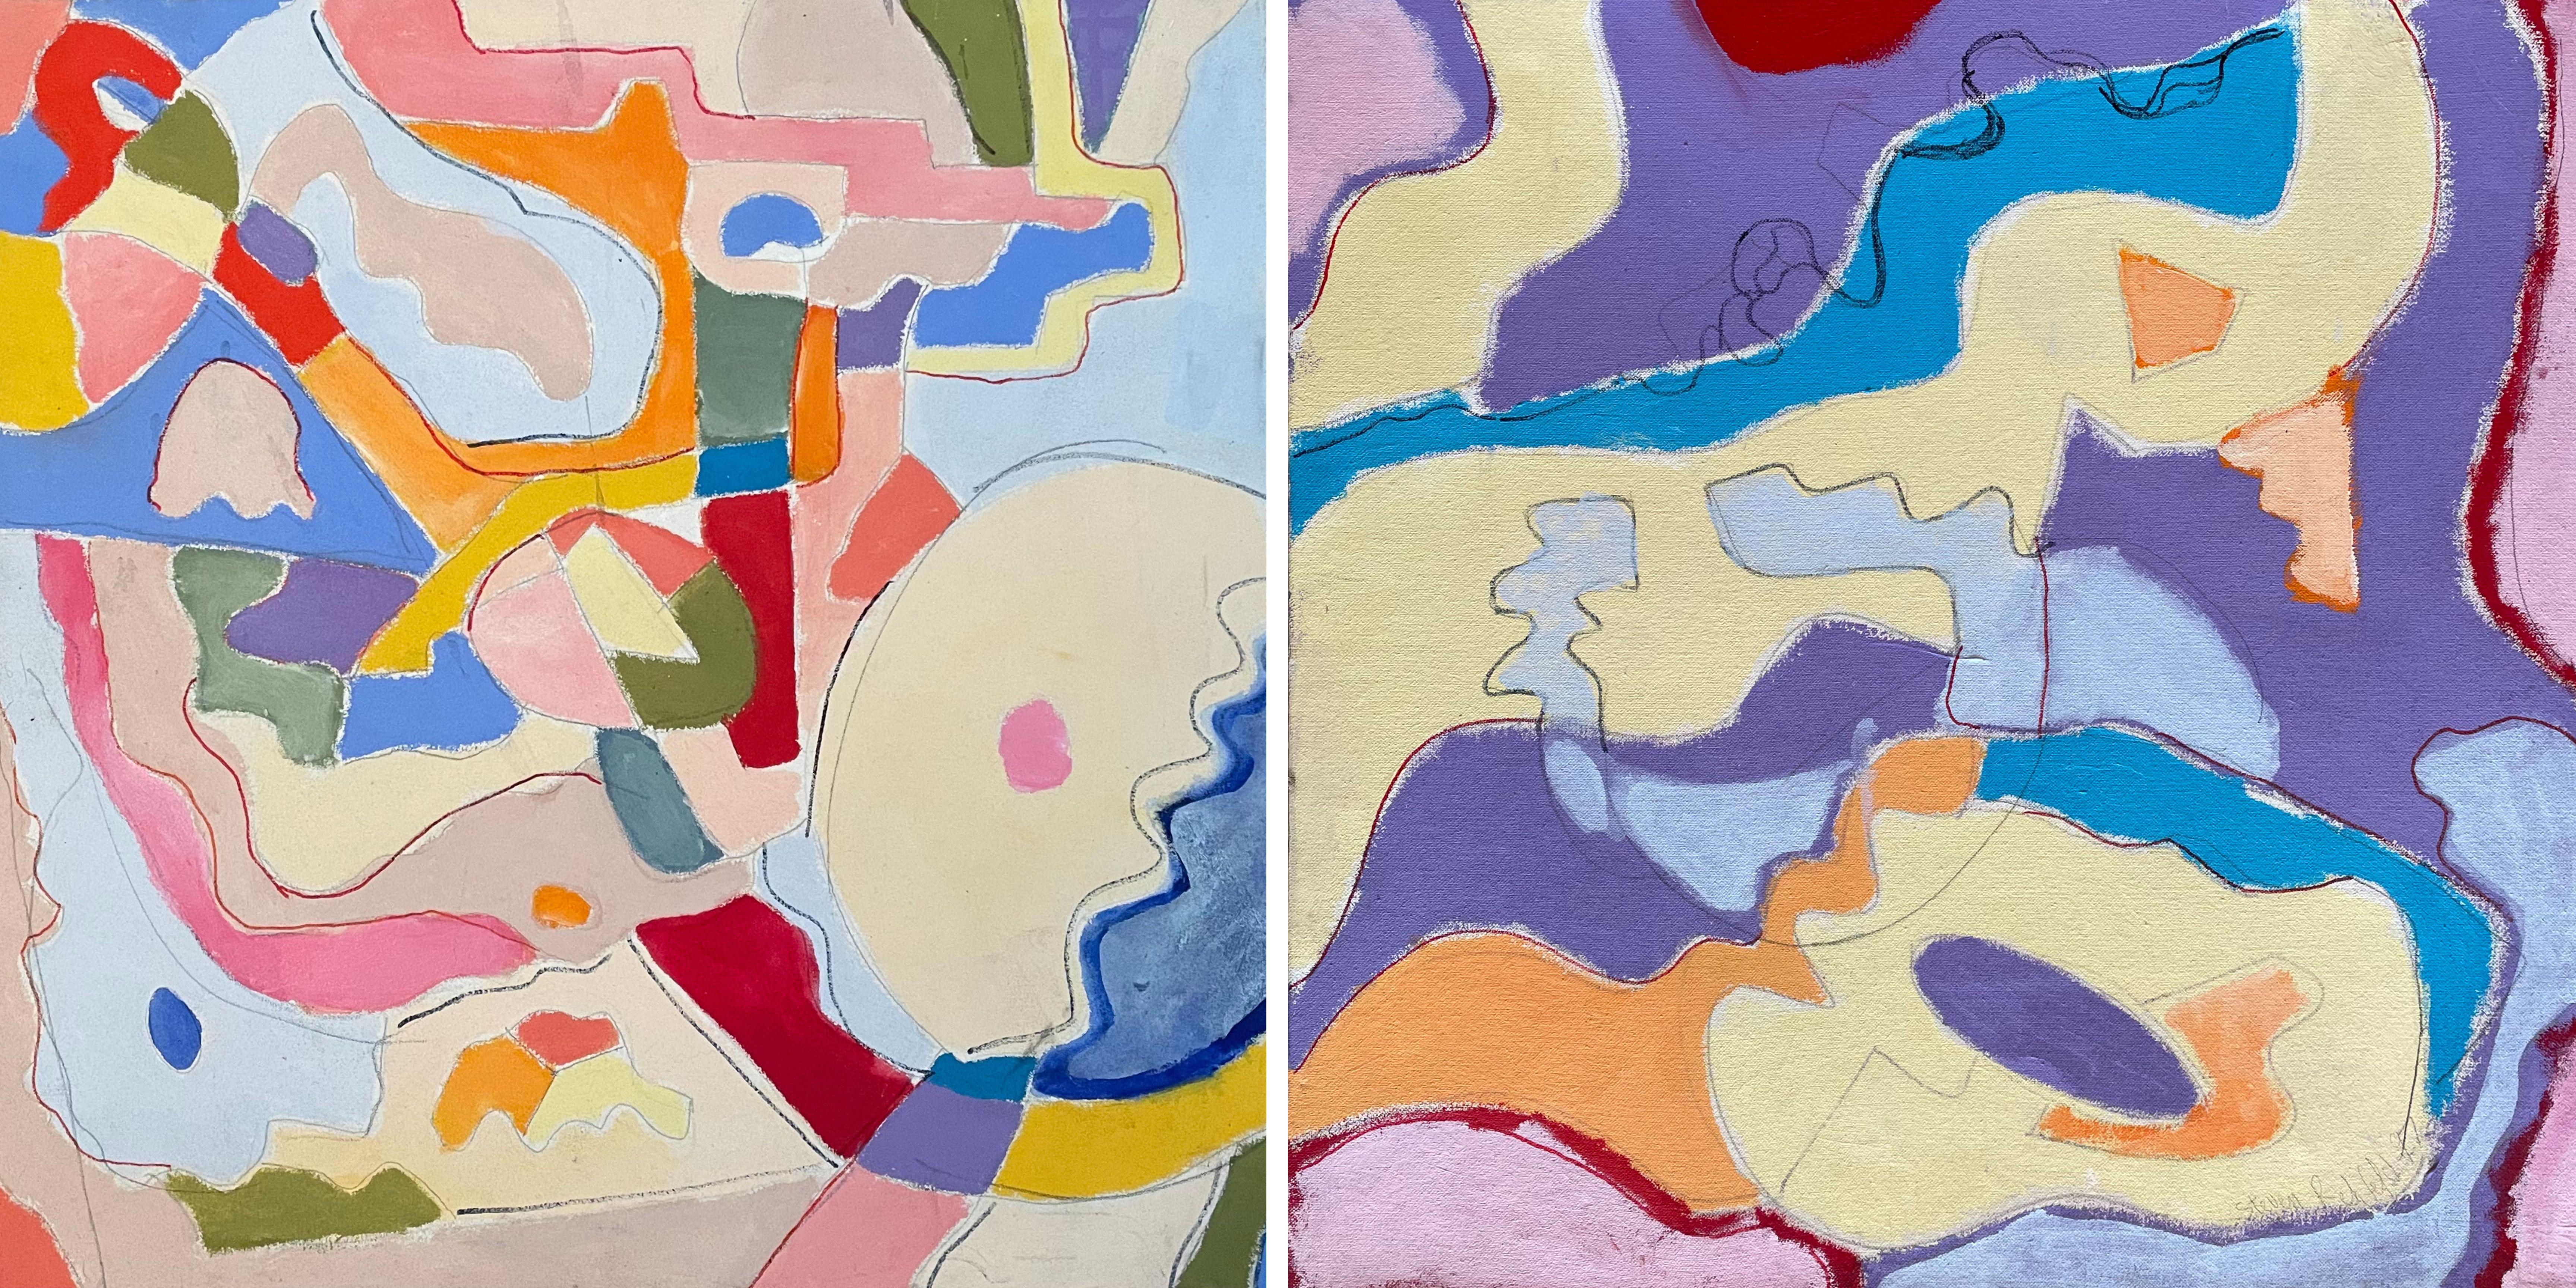 Steven H. Rehfeld's 24" x 48" diptych, "Coastal," captivates viewers with its masterful dance of colors and shapes. Each panel exudes an abstract, yet harmonious representation of nature's myriad landscapes. In one, we are greeted by soft lilacs,